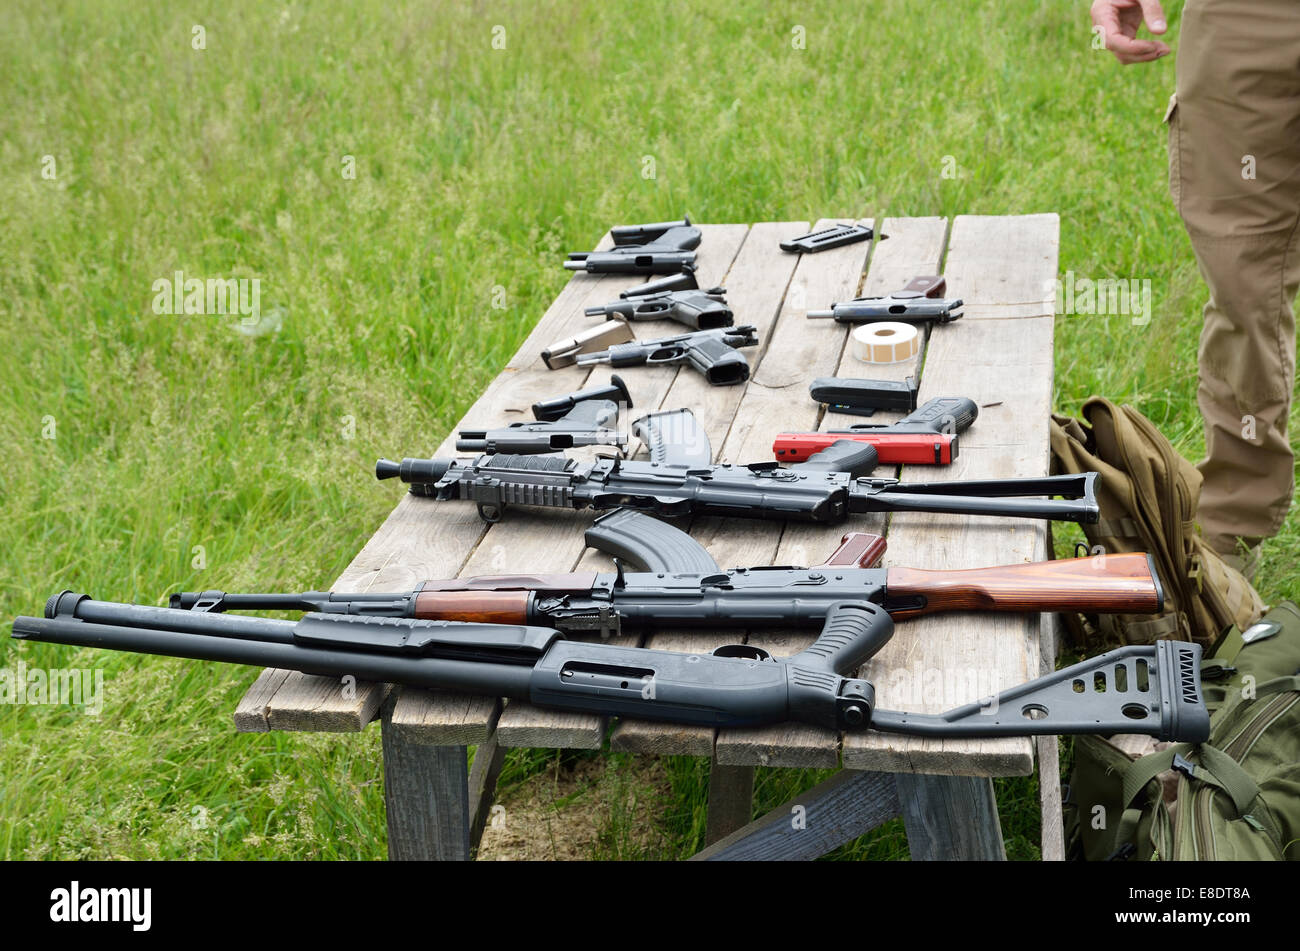 Firearm on the table outdoors Stock Photo